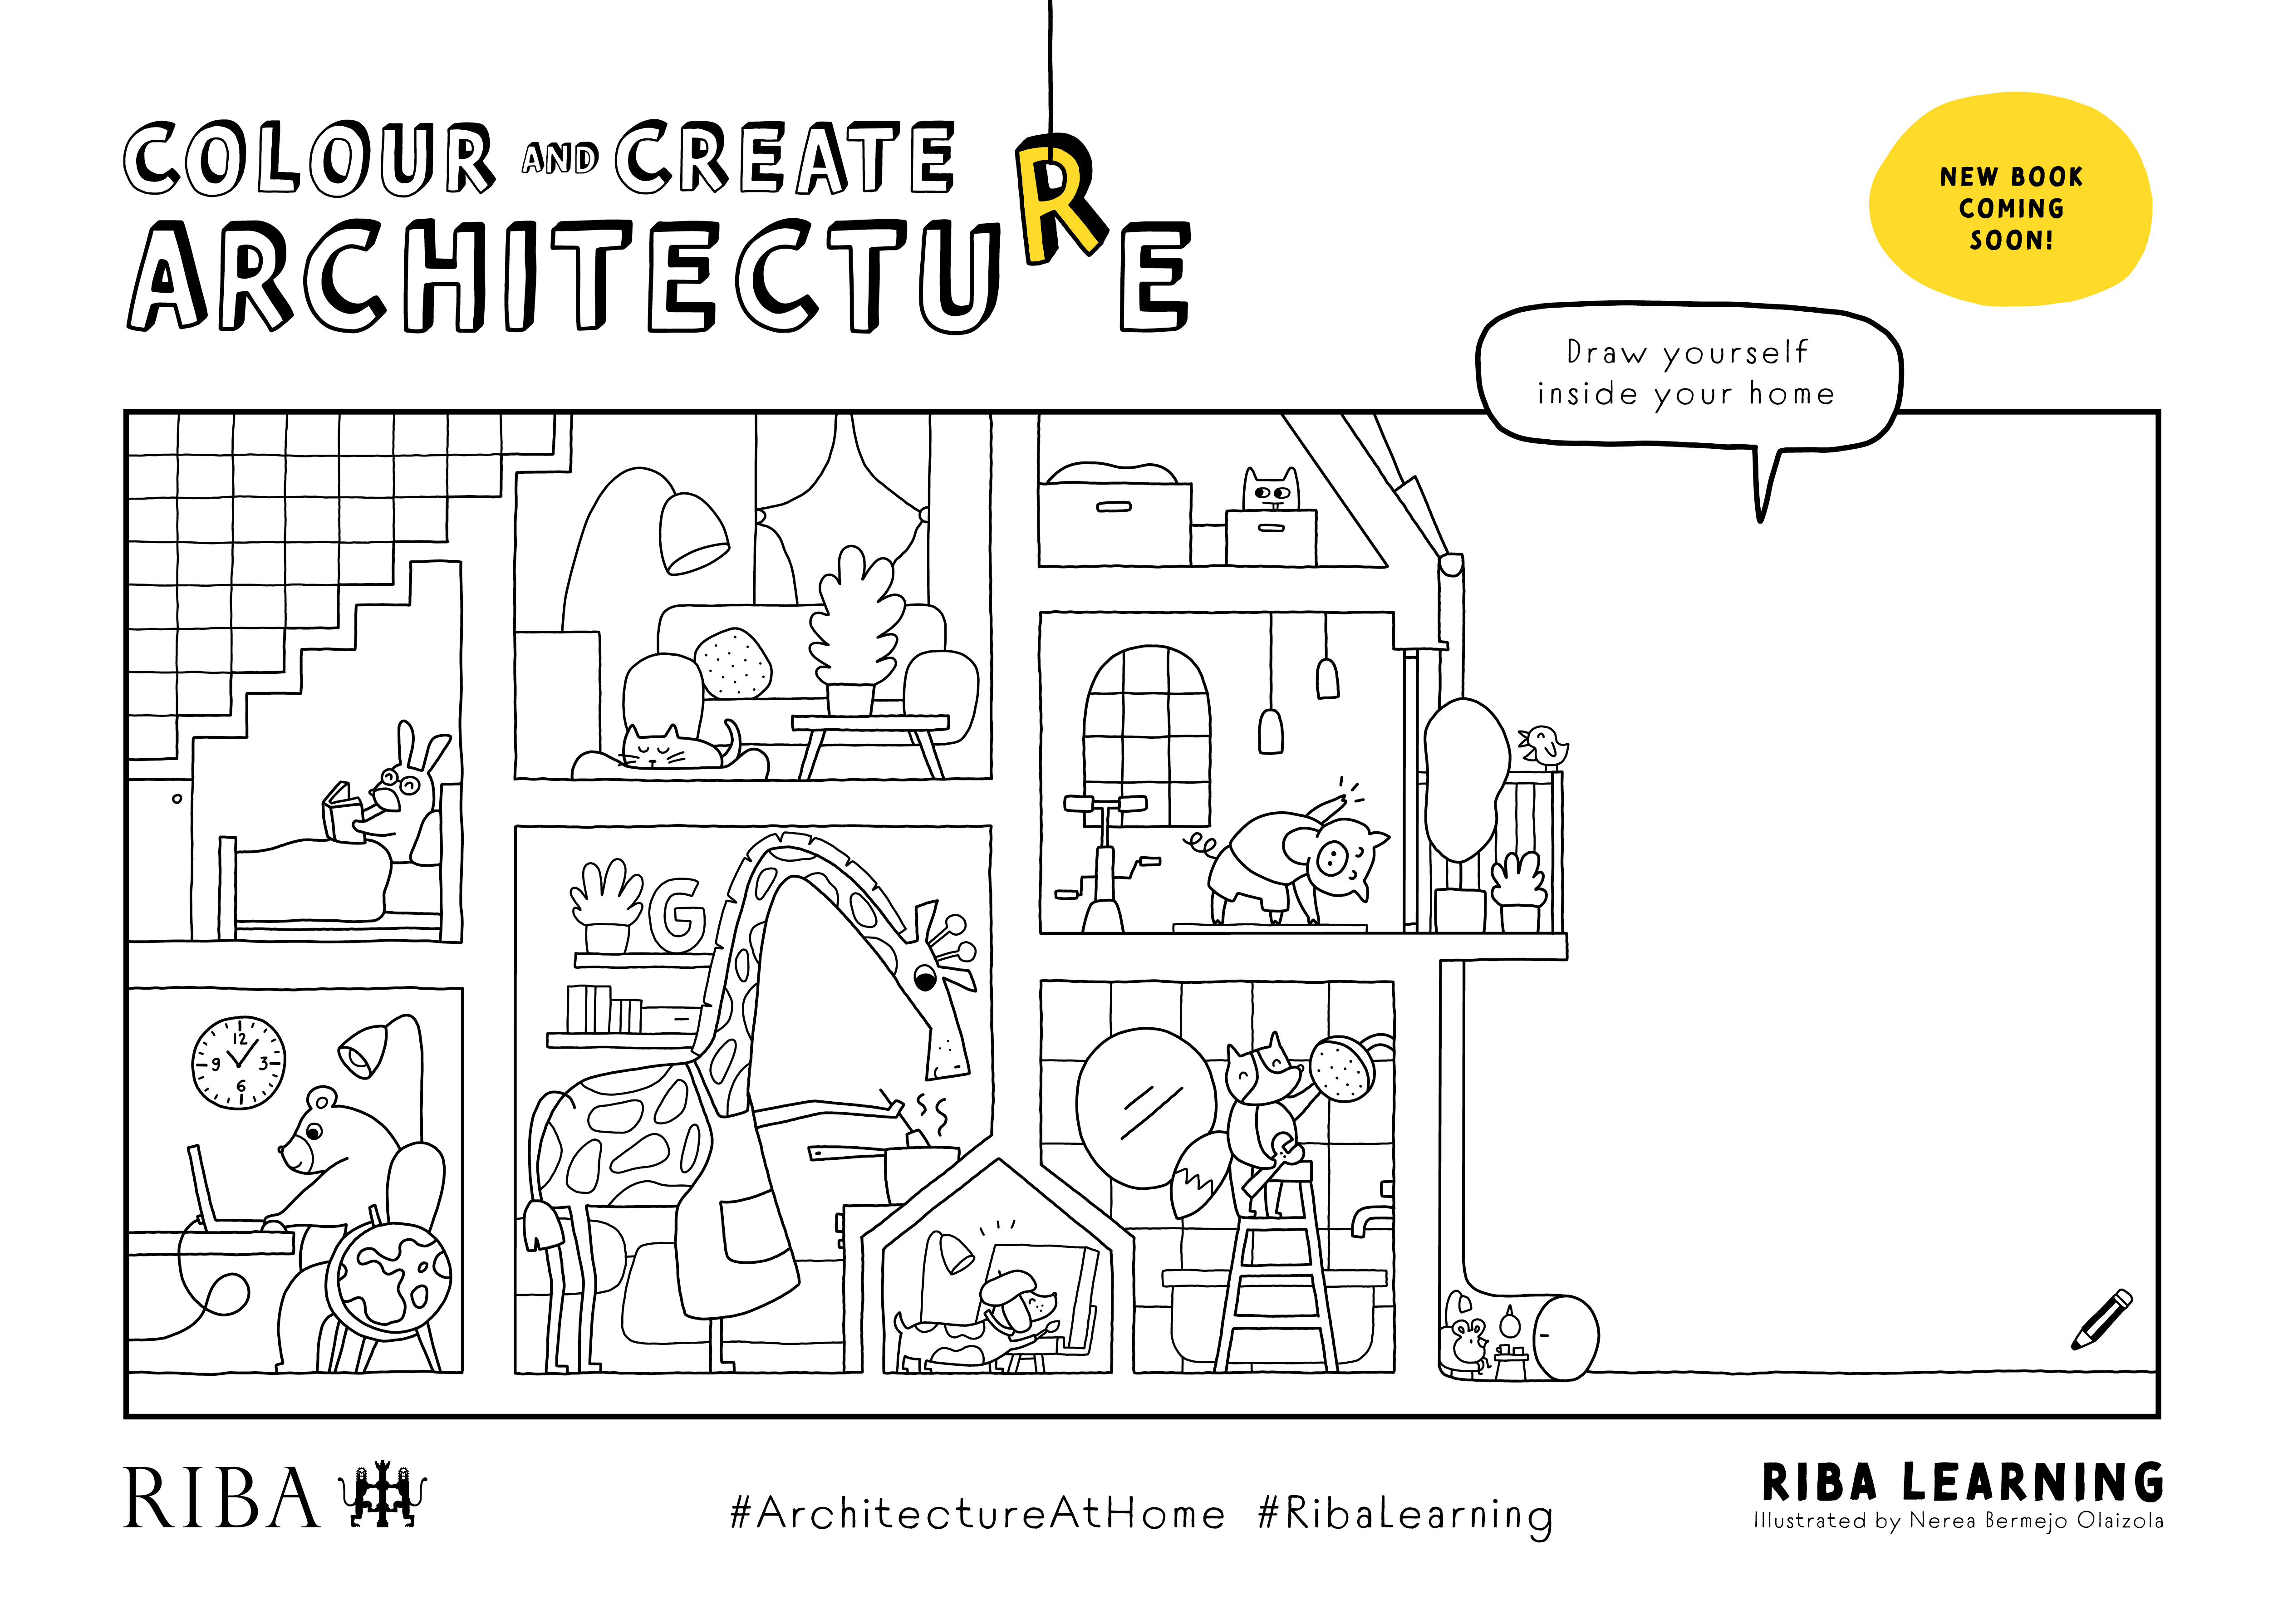 Free downloadable activities let kids explore architecture and design -  Curbed